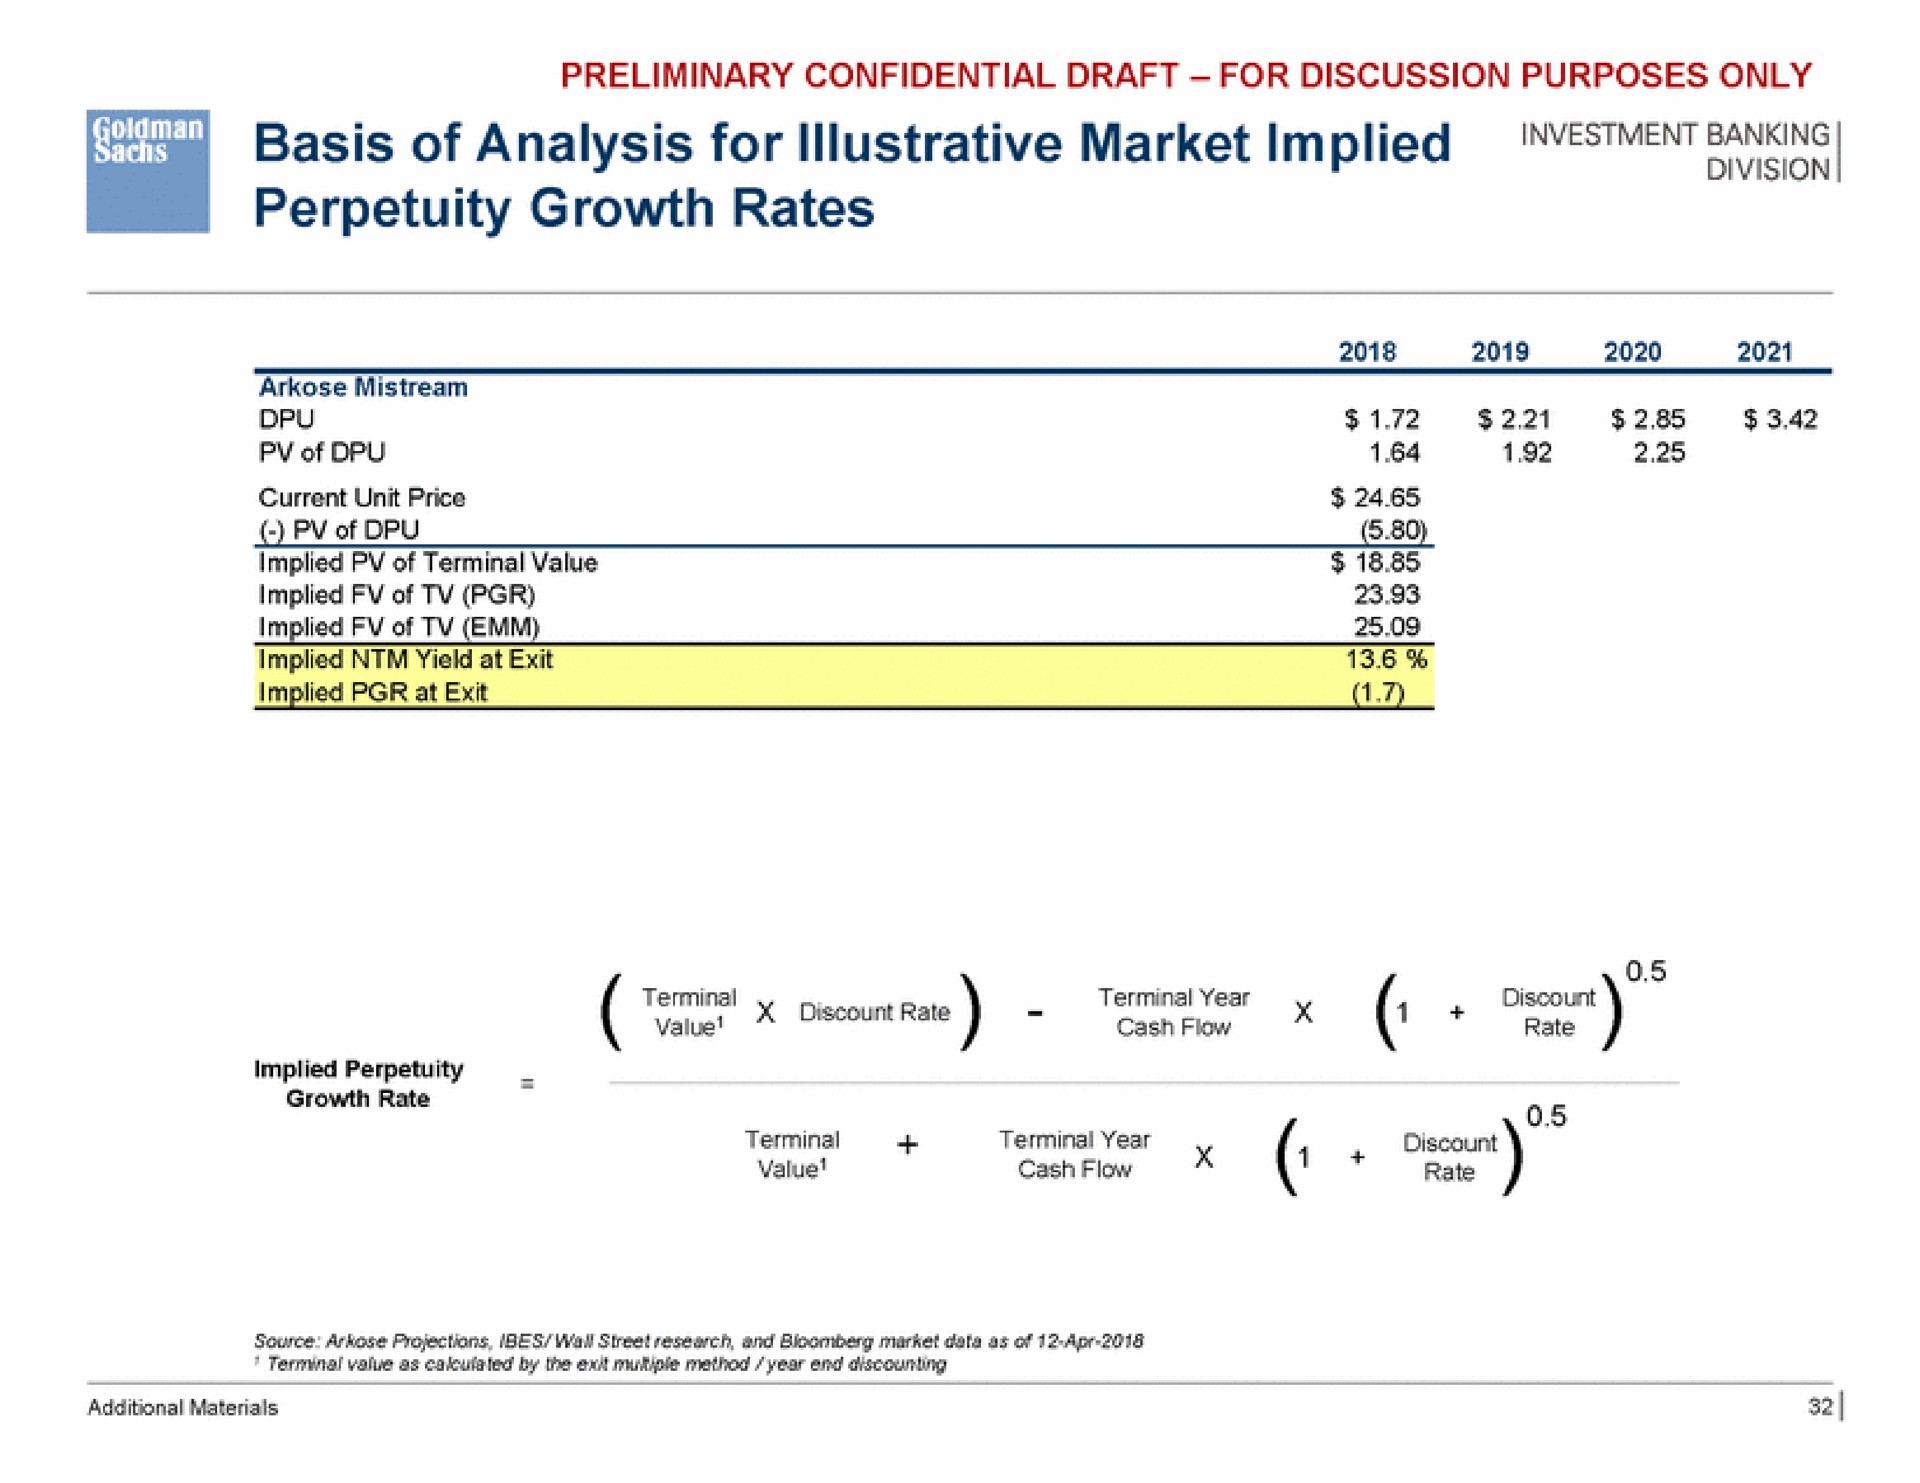 basis of analysis for illustrative market implied perpetuity growth rates | Goldman Sachs